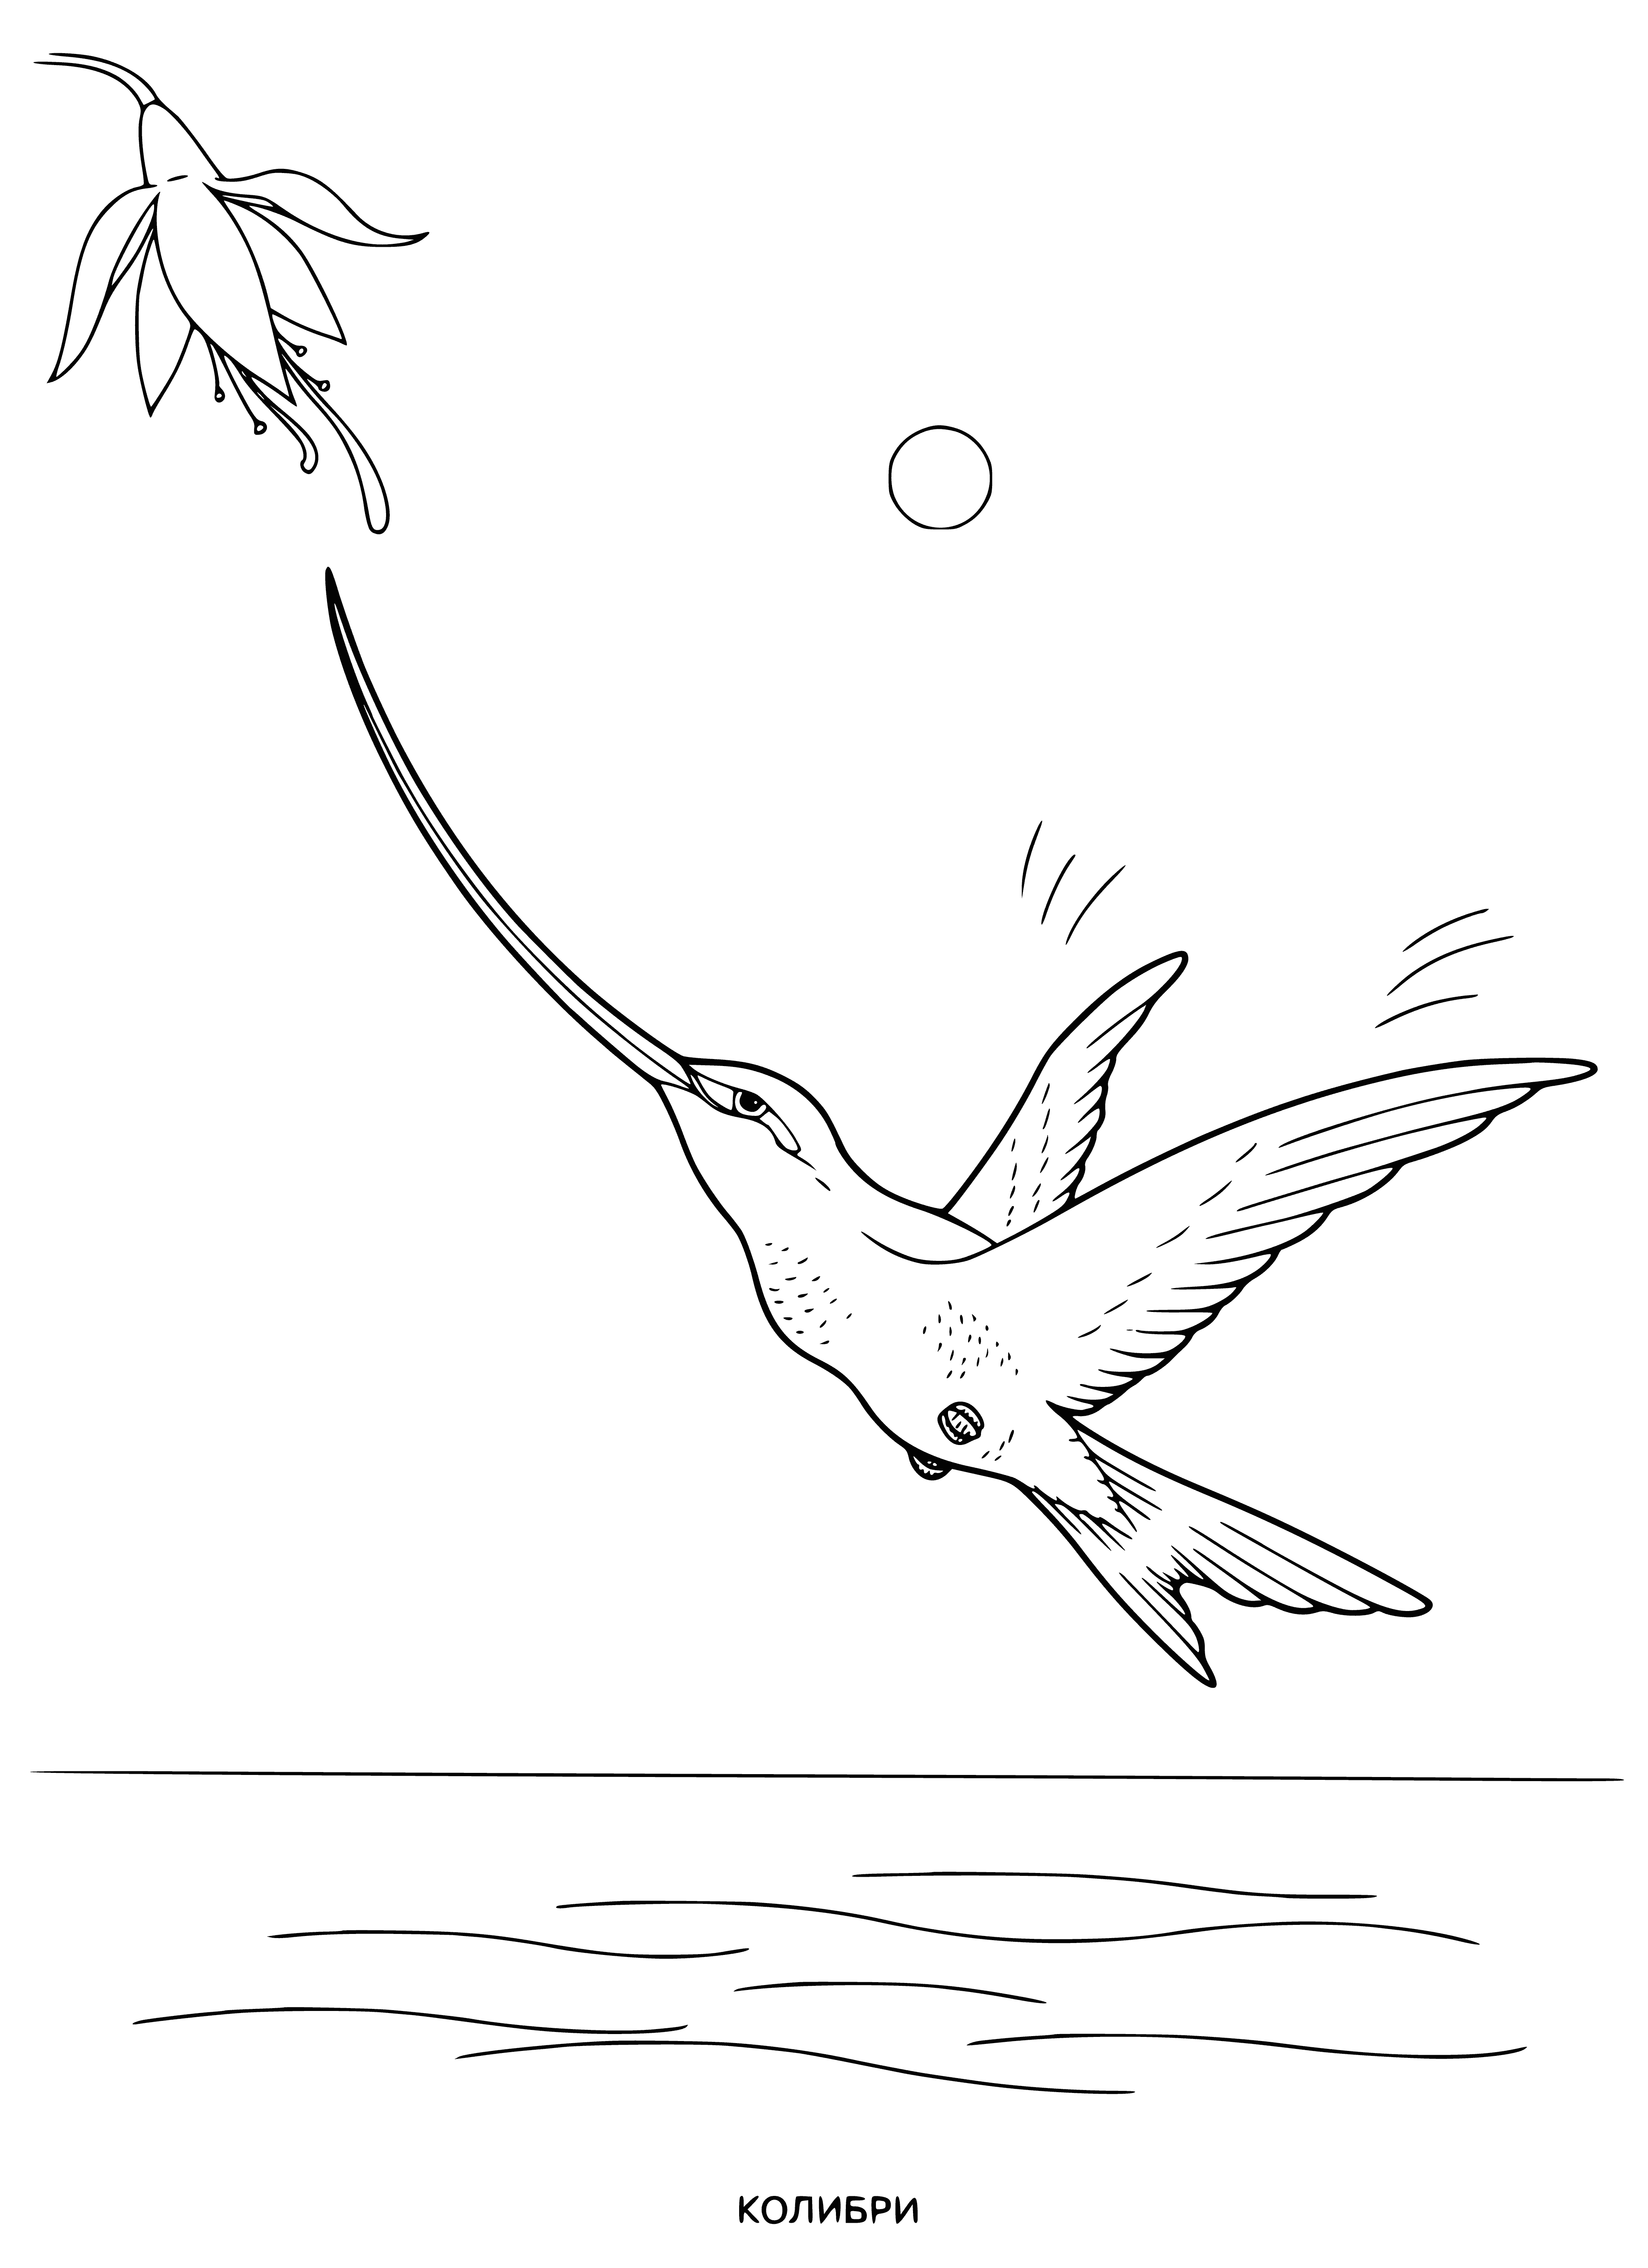 coloring page: Five colorful hummingbirds flying around a jungle, all with the same long beak and small body characteristic of hummingbirds. #hummingbirds